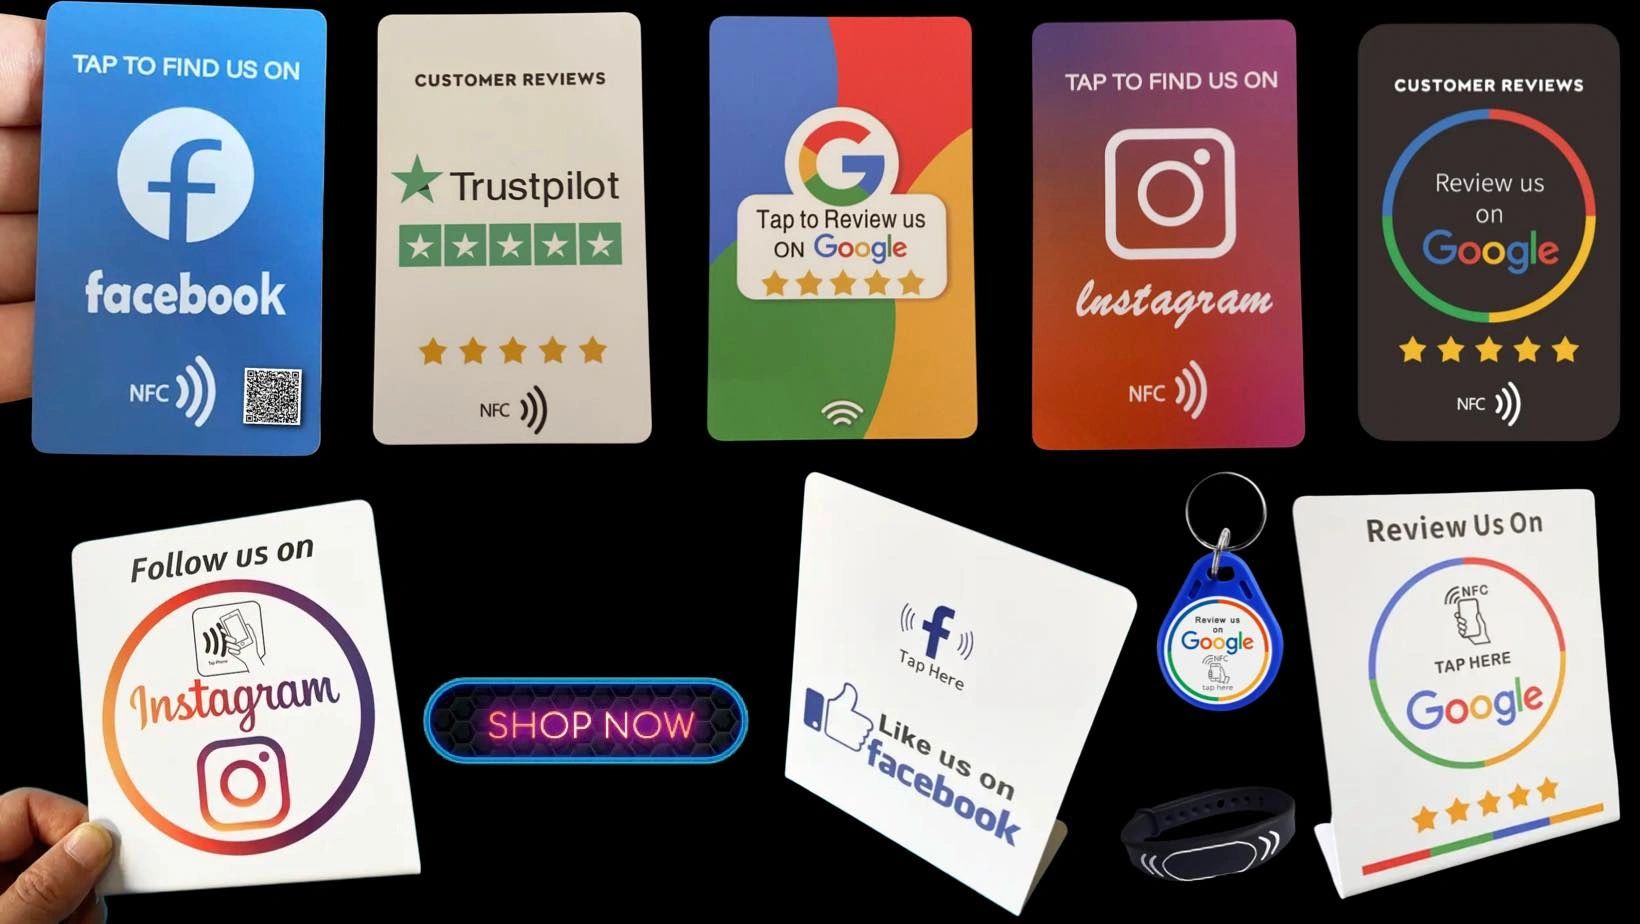 Shop for nfc cards at Netzwork.me explore google review nfc cards, instagram nfc displays & more